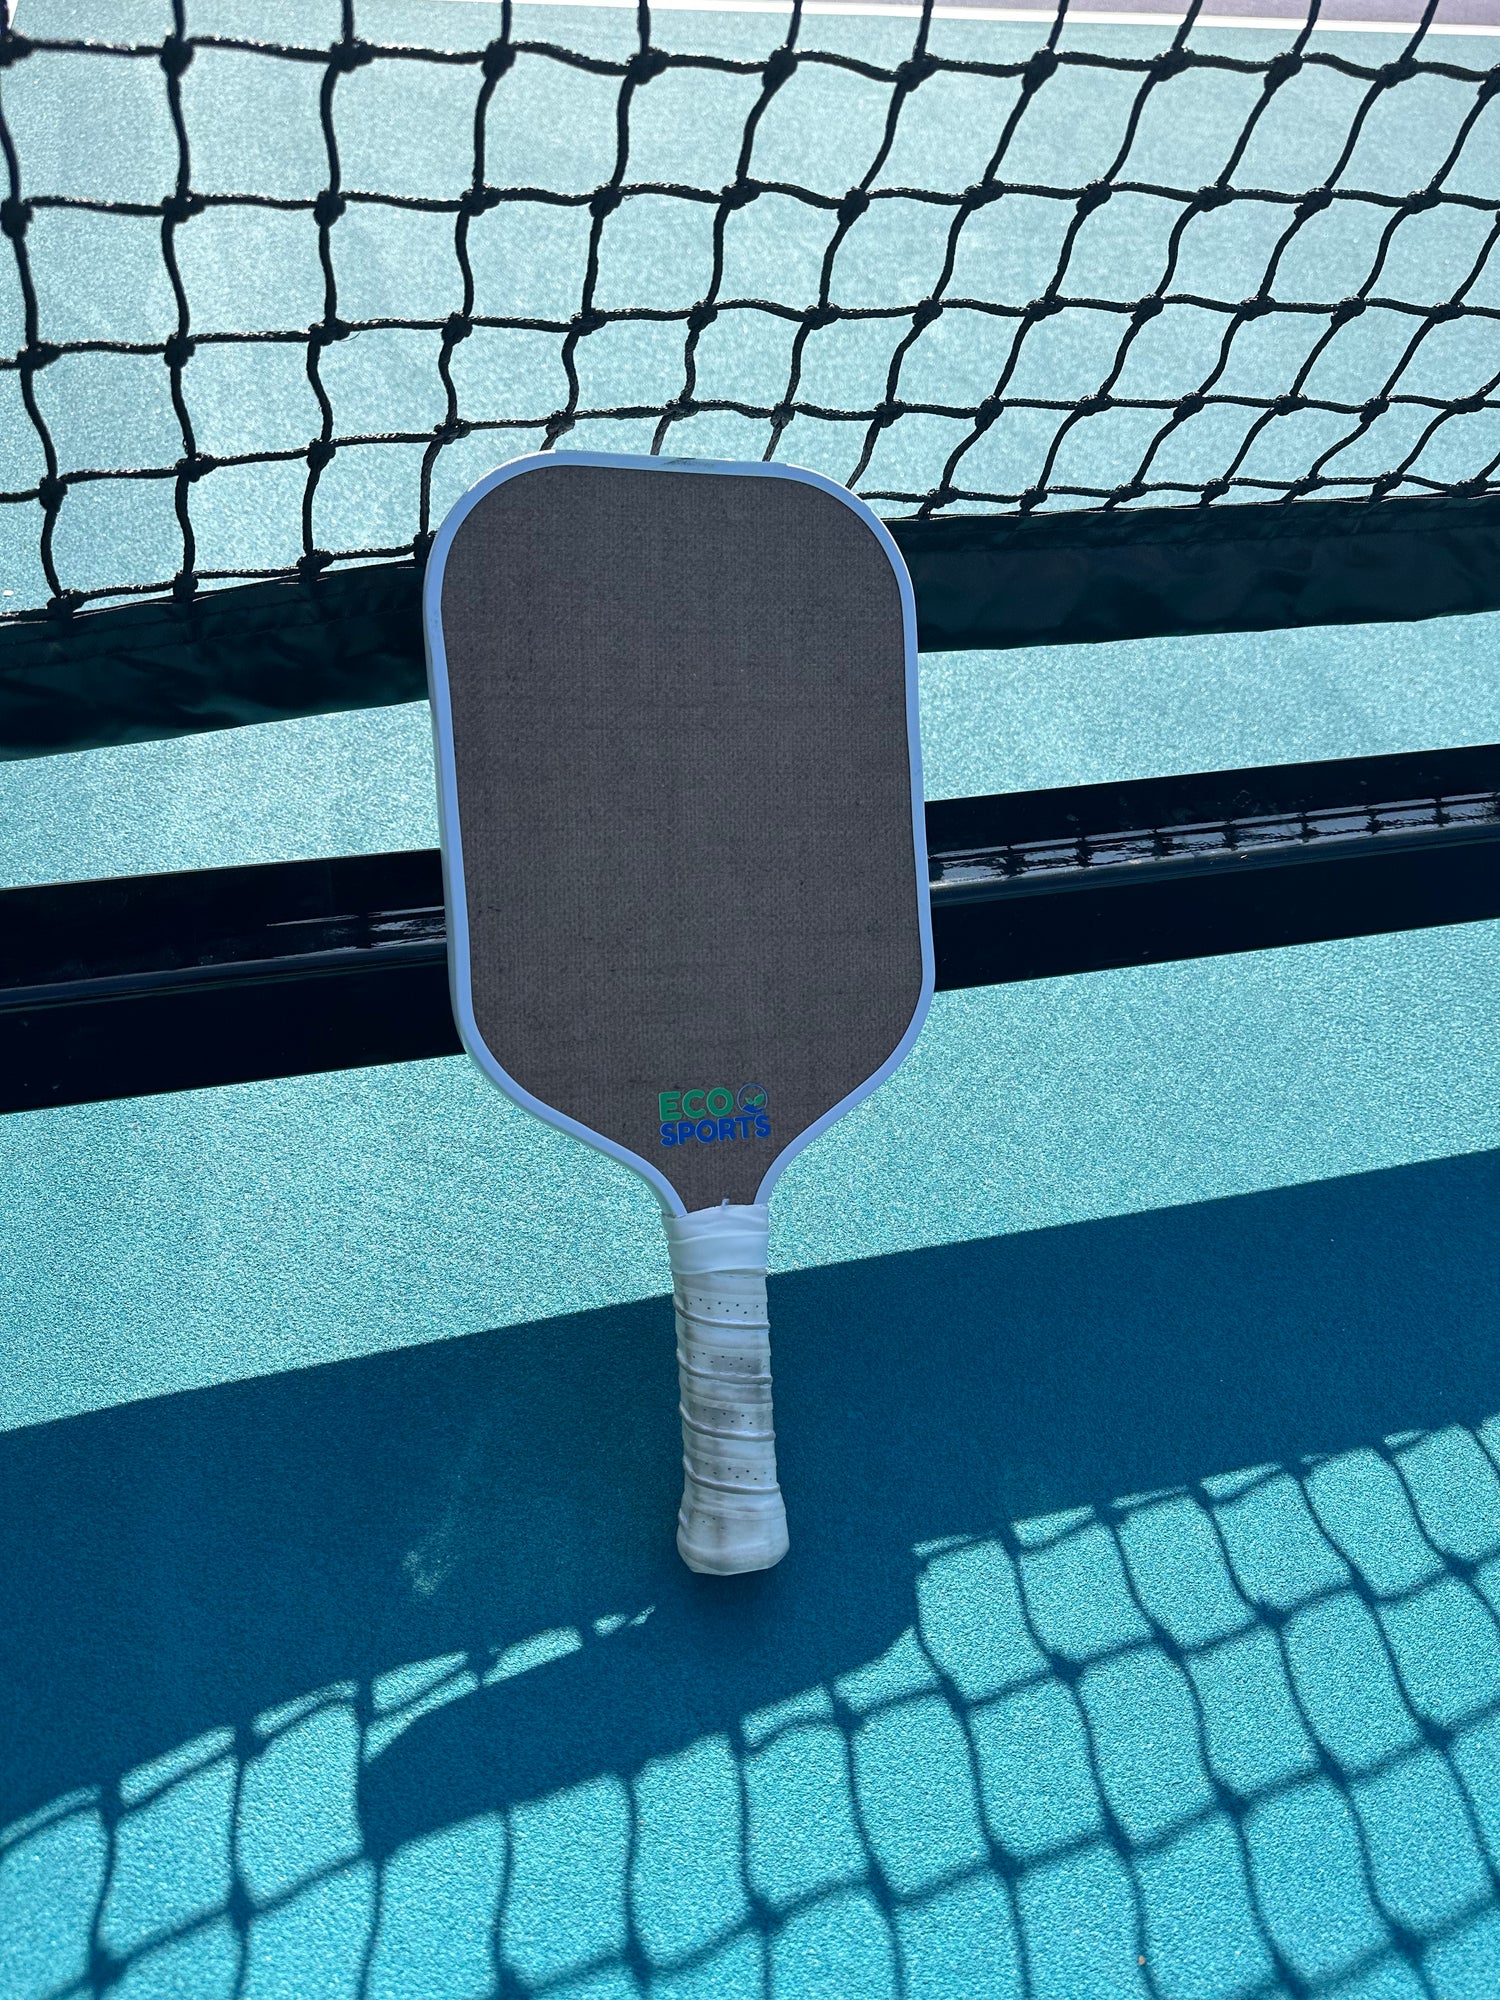 Is Buying a Used Pickleball Paddle Worth It?